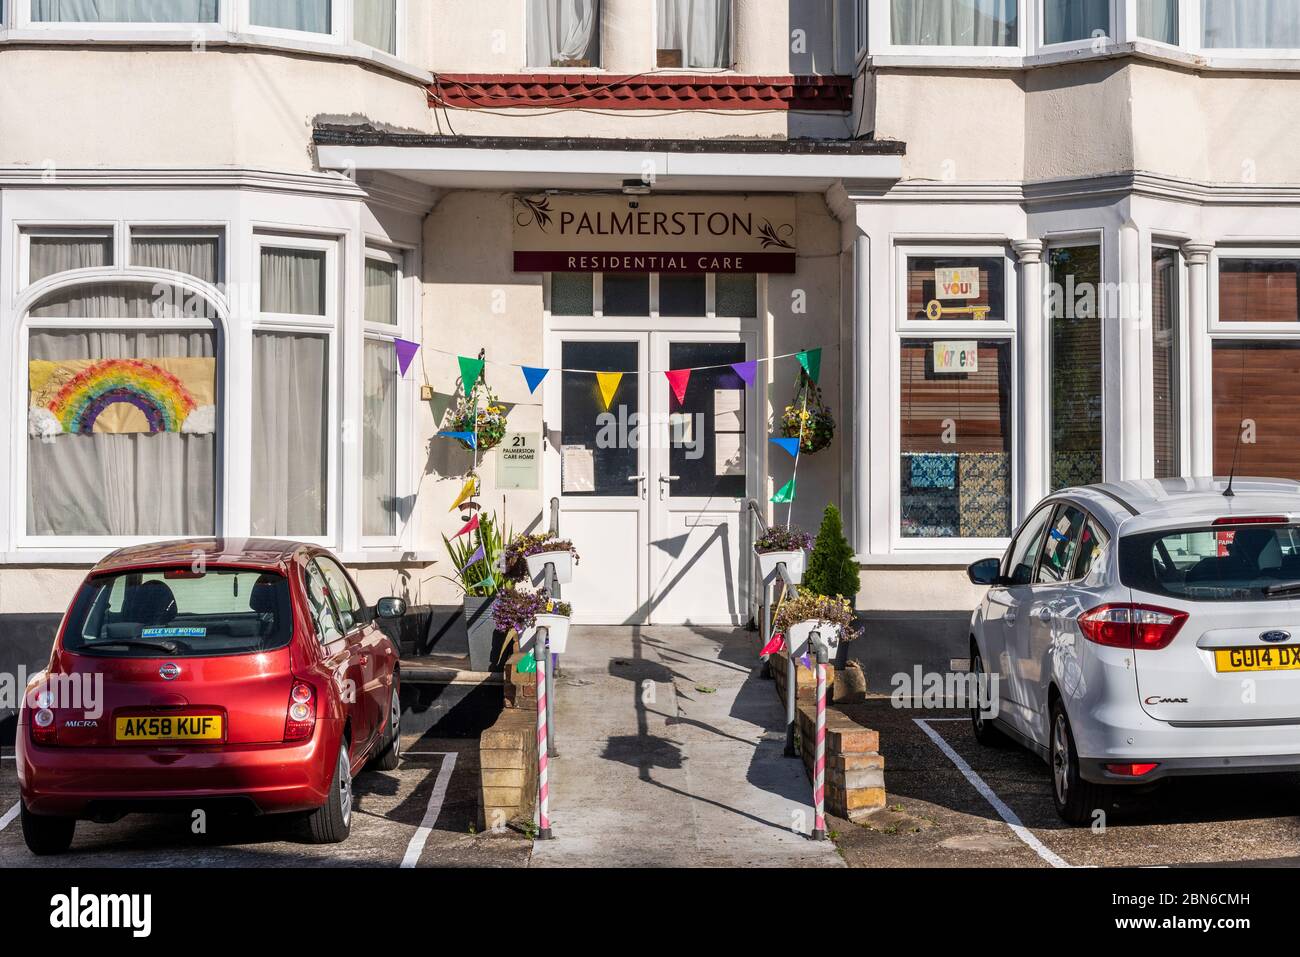 Palmerston Residential Care, owned by Abbeyfield and Wesley Housing Association Ltd, in Westcliff on Sea, Southend, Essex, UK. COVID-19 NHS, VE Day Stock Photo